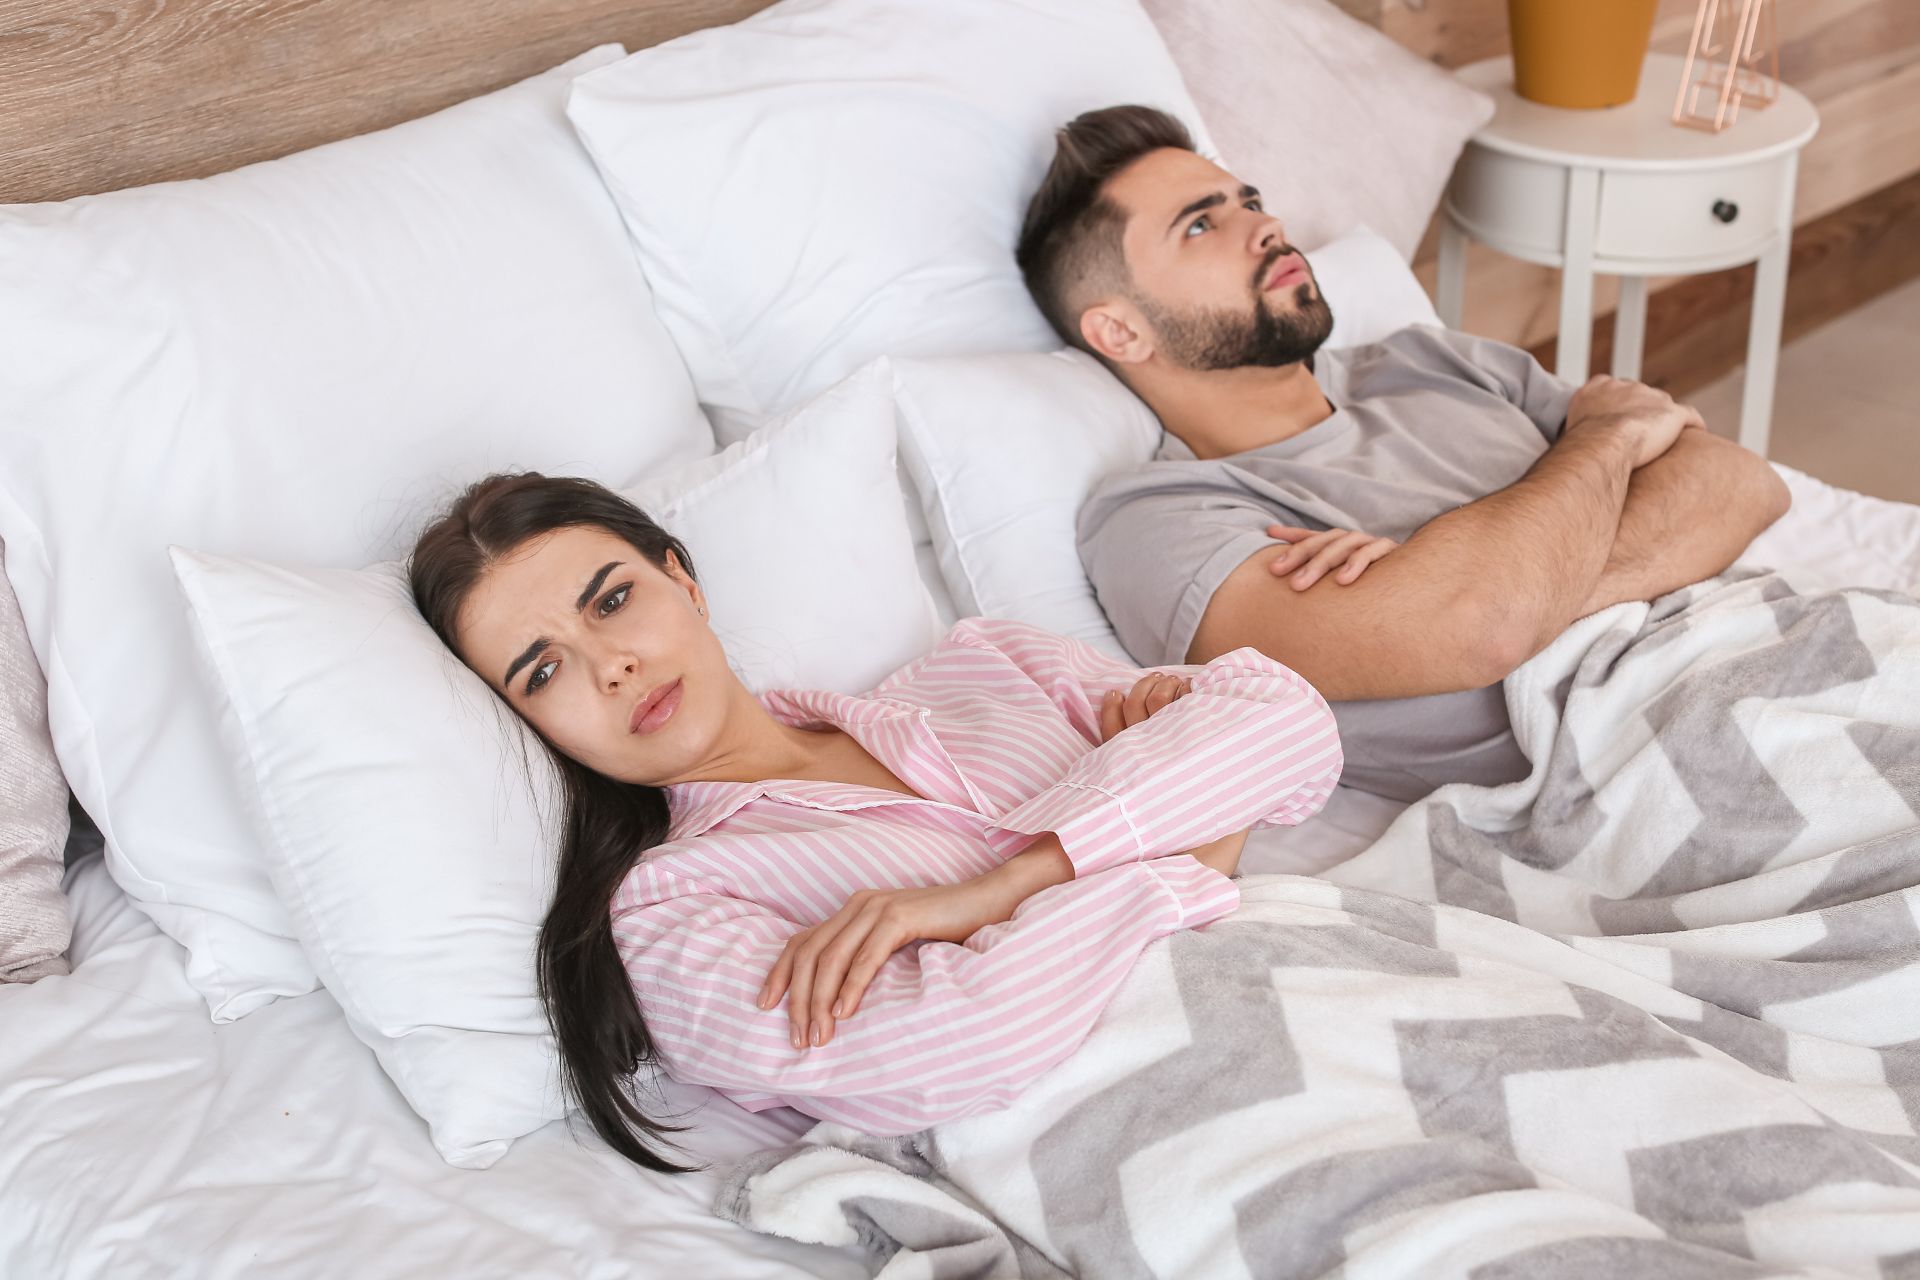 signs you know your marriage is over